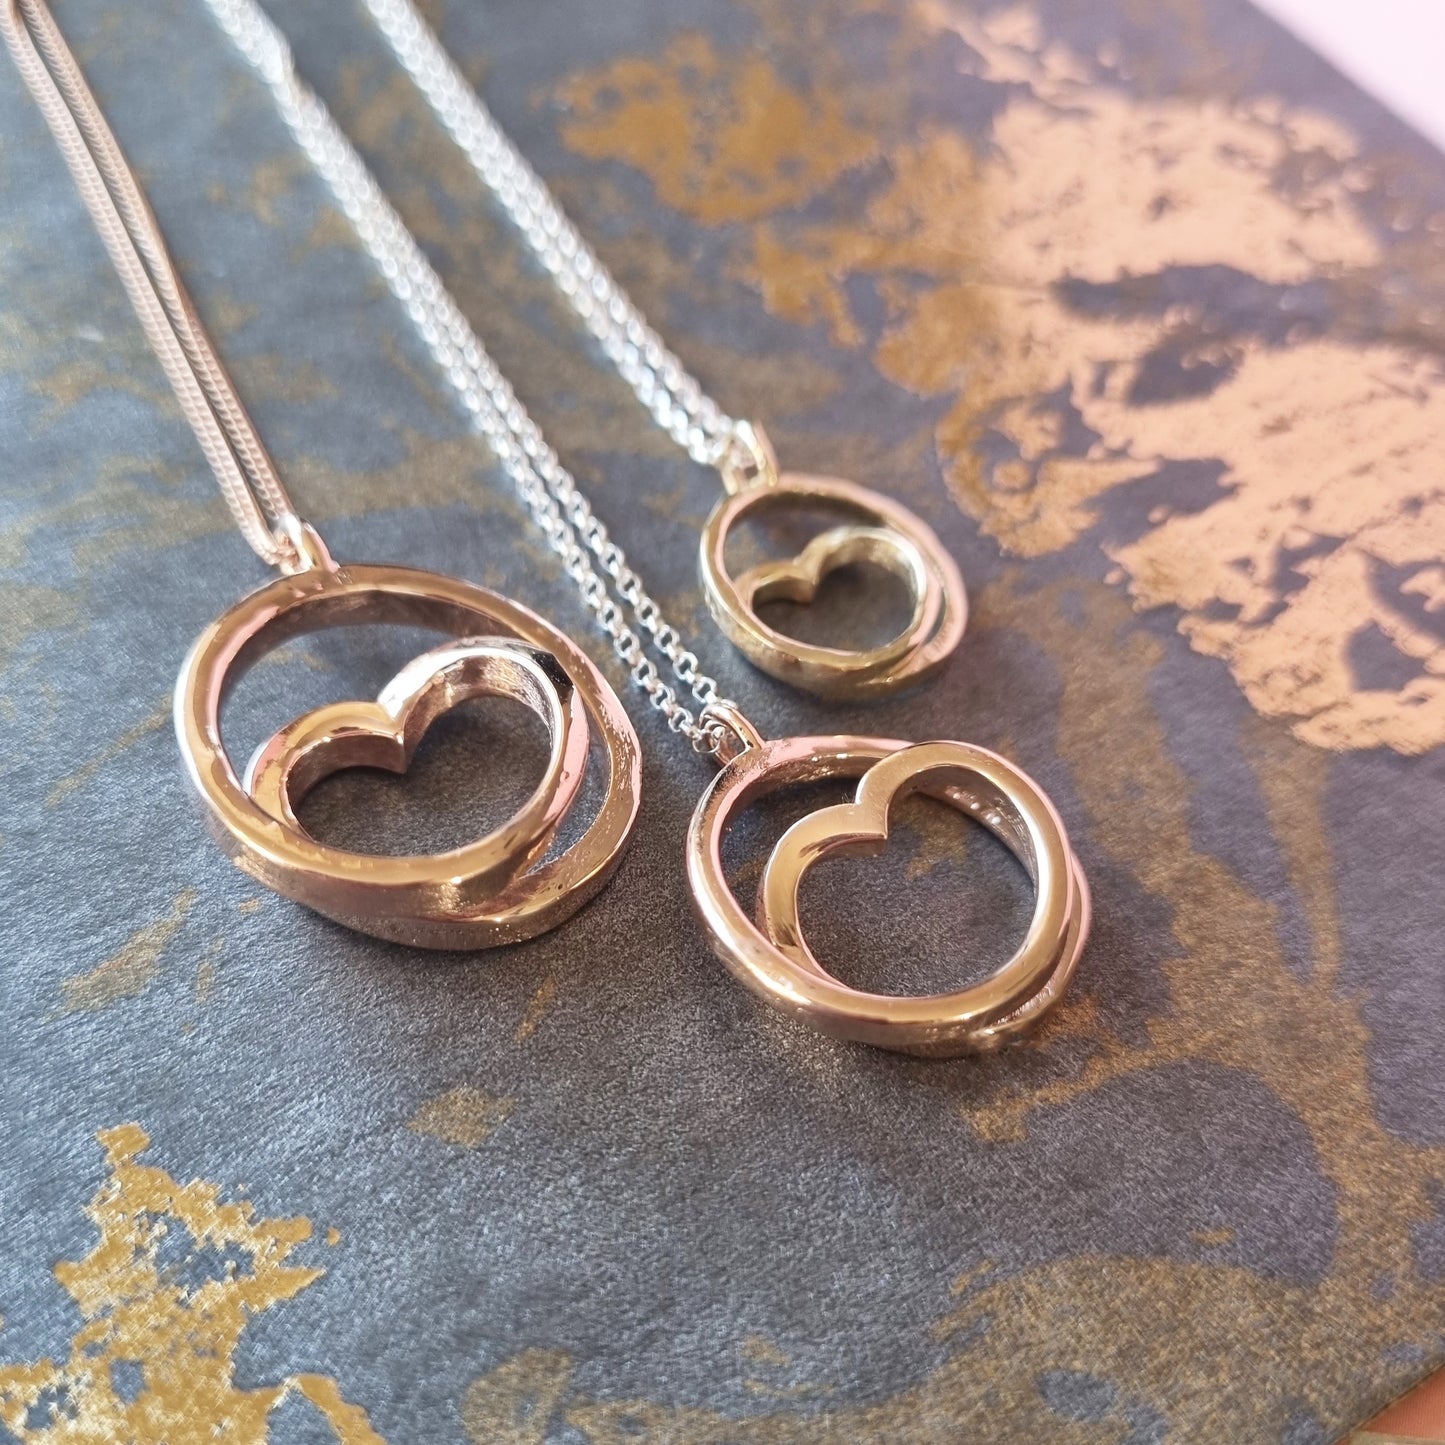 The three sizes of Infinite Love necklace - Classic, mini and tiny